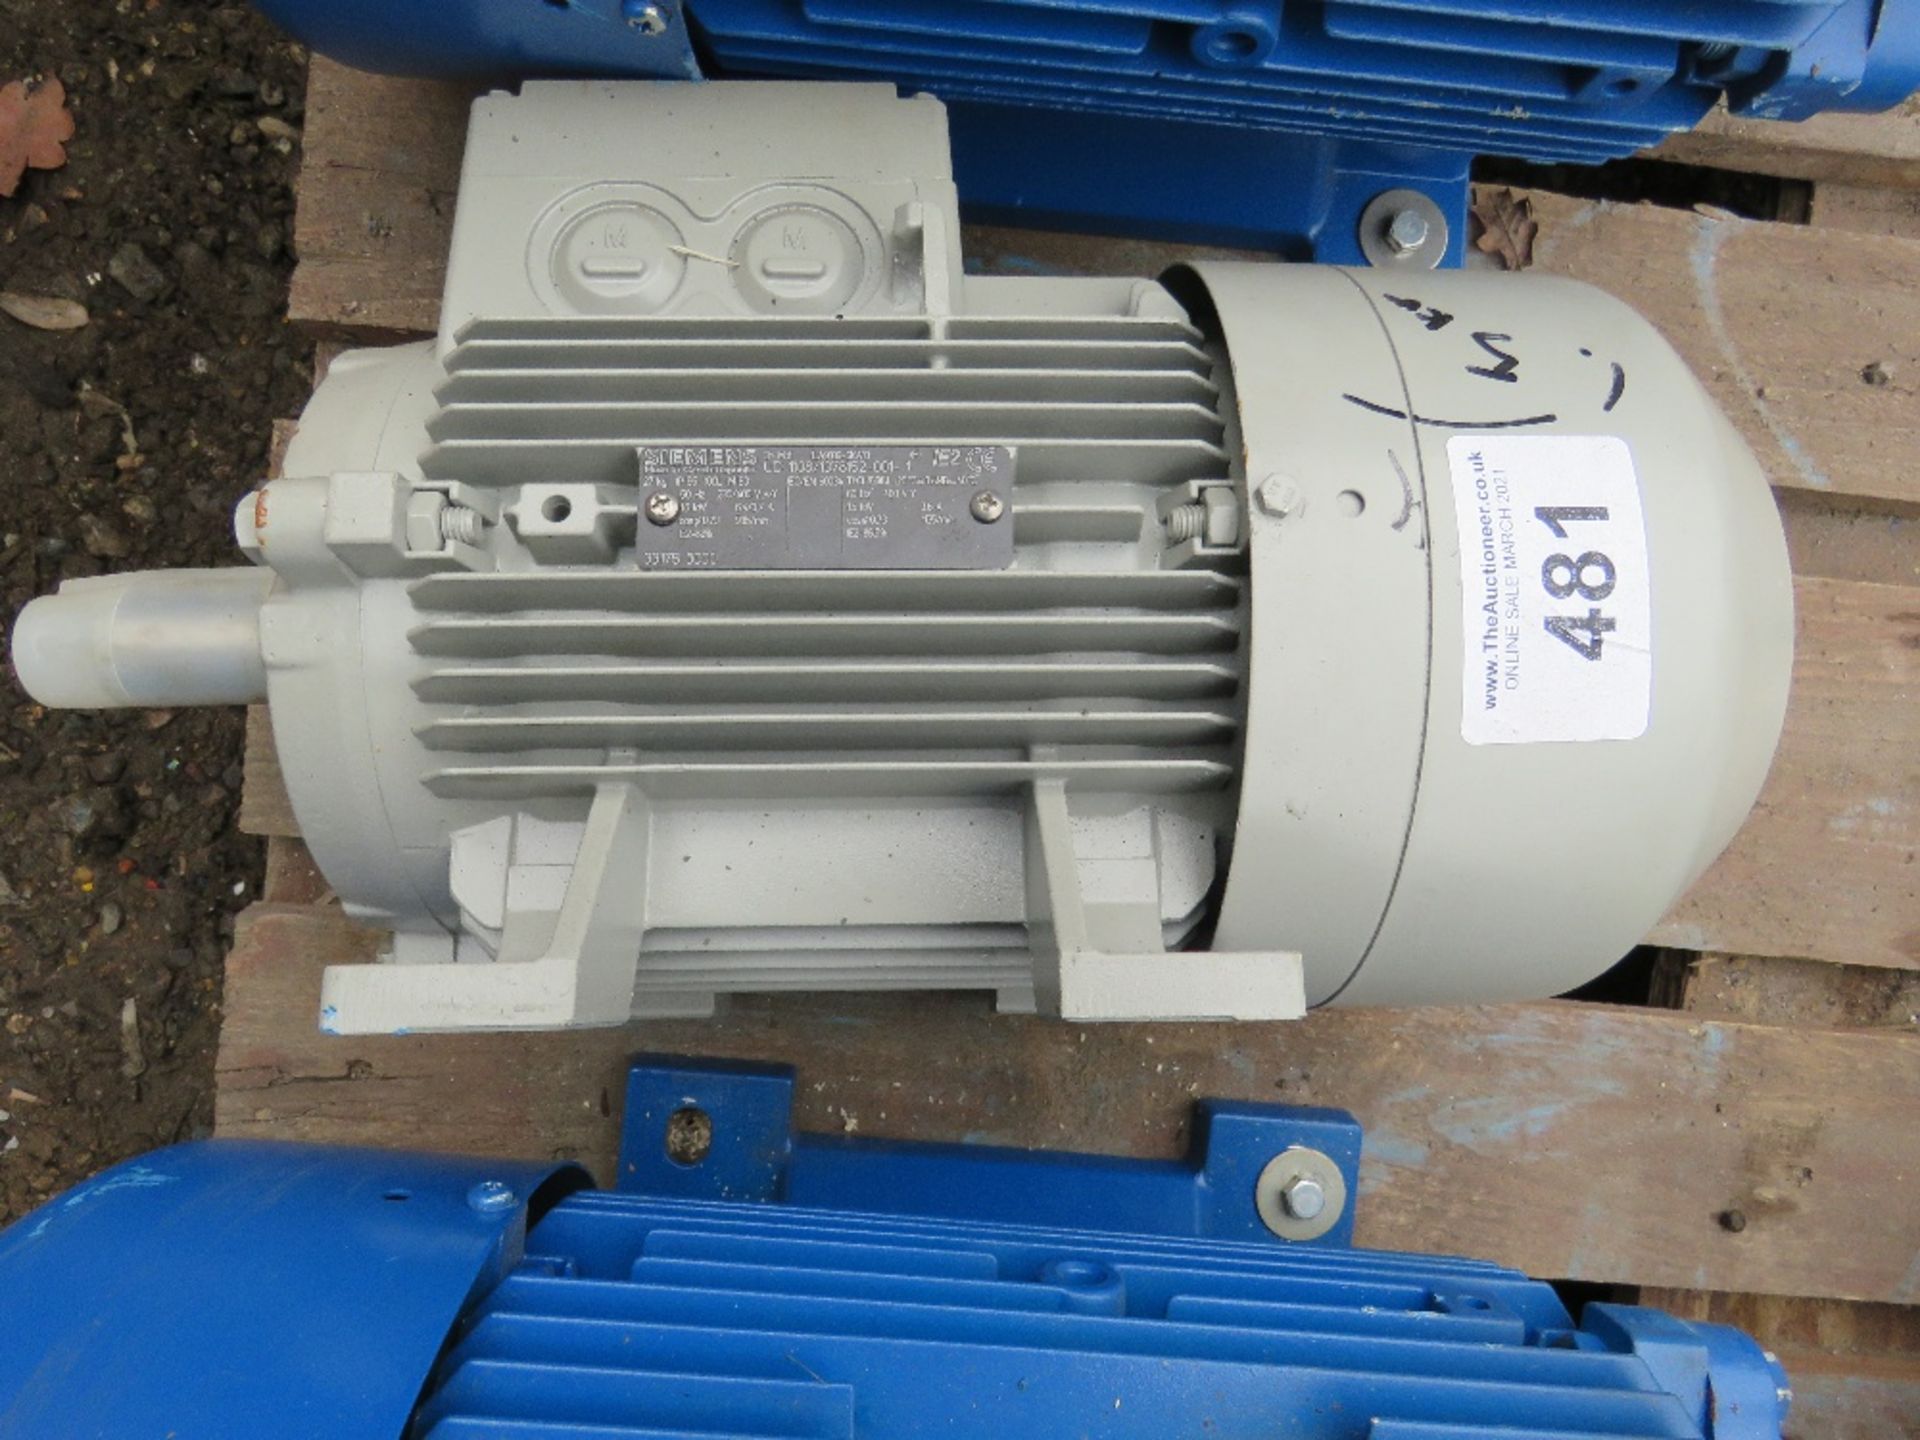 1 X SIEMENS INDUSTRIAL 1.5KW RATED ELECTRIC MOTOR, SOURCED FROM DEPOT CLEARANCE.